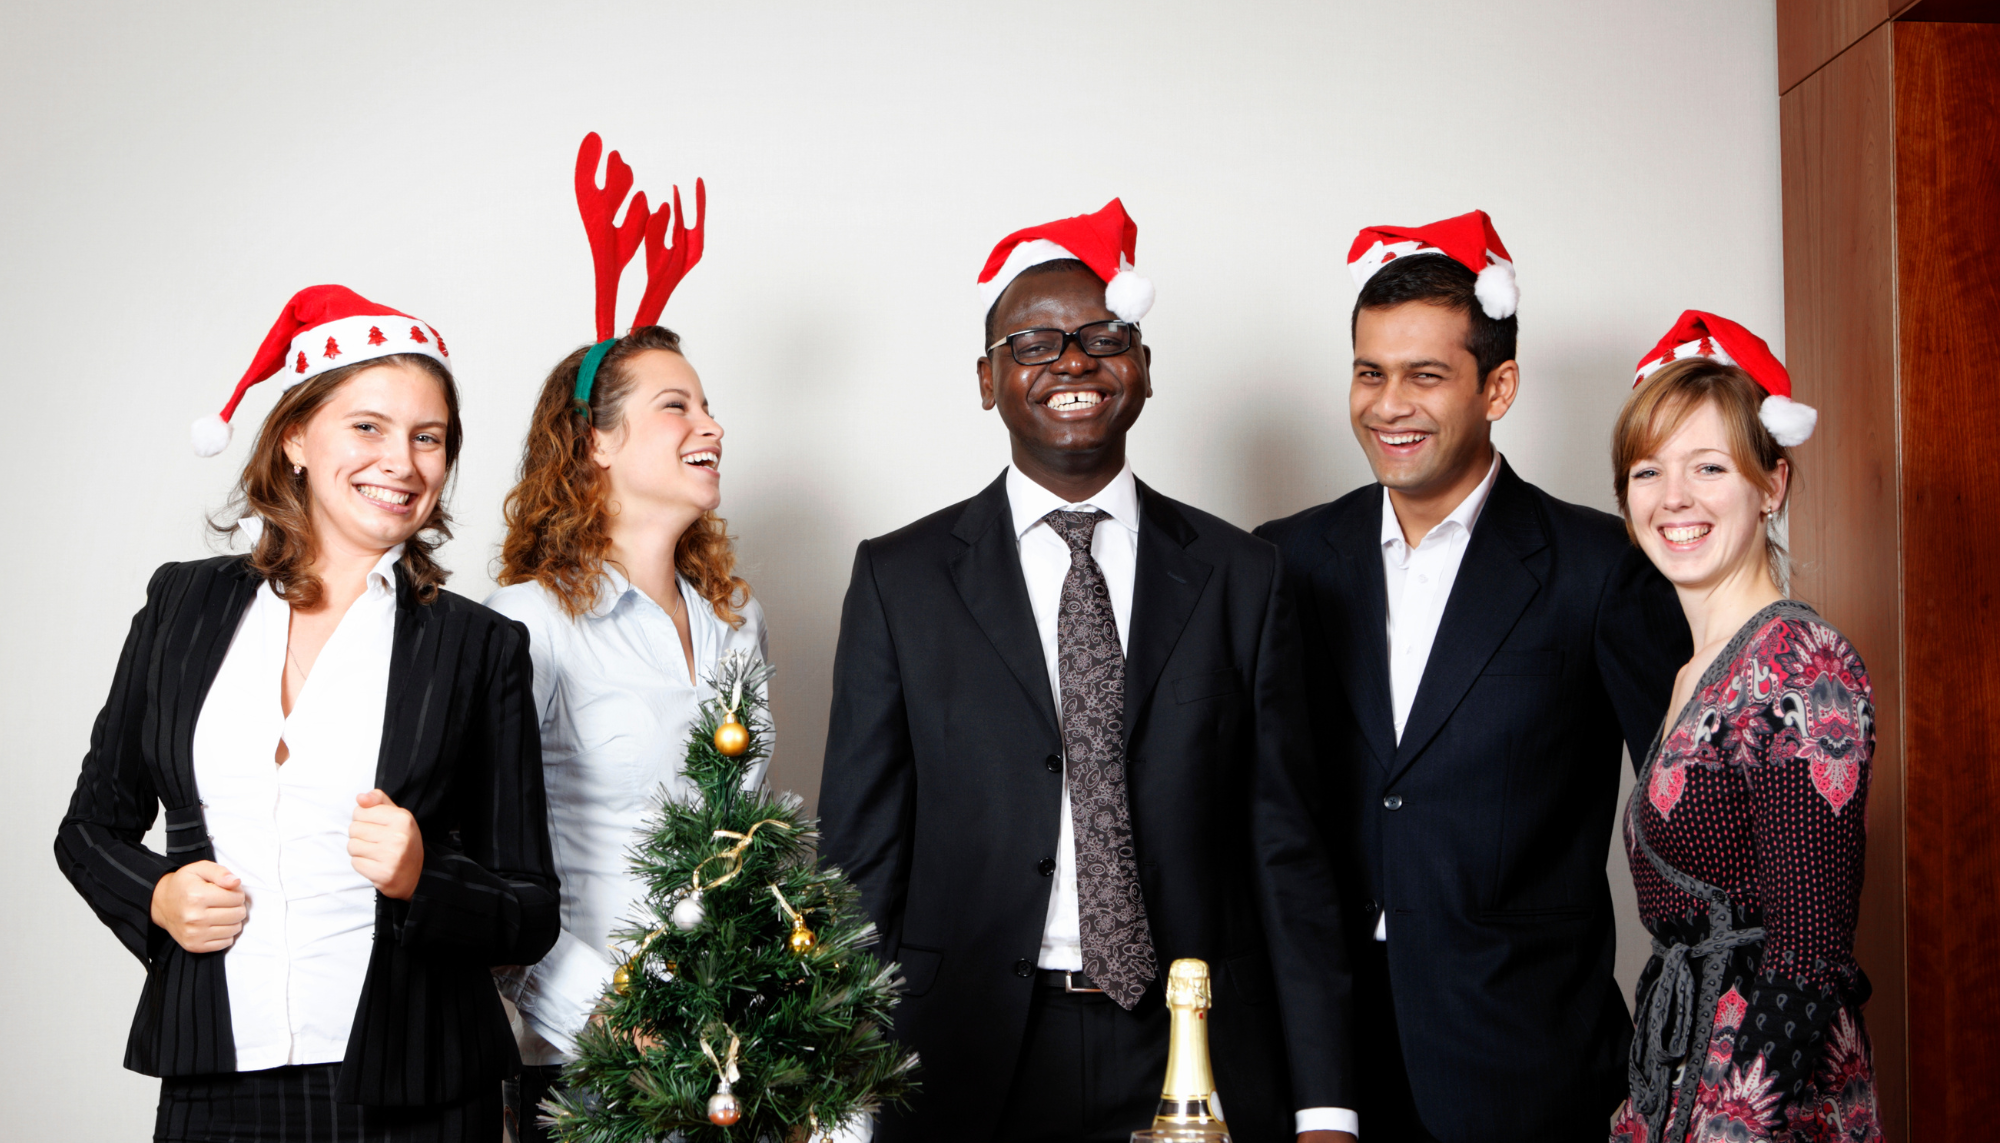 5 people laughing and standing in smart uniform wearing Christmas hats